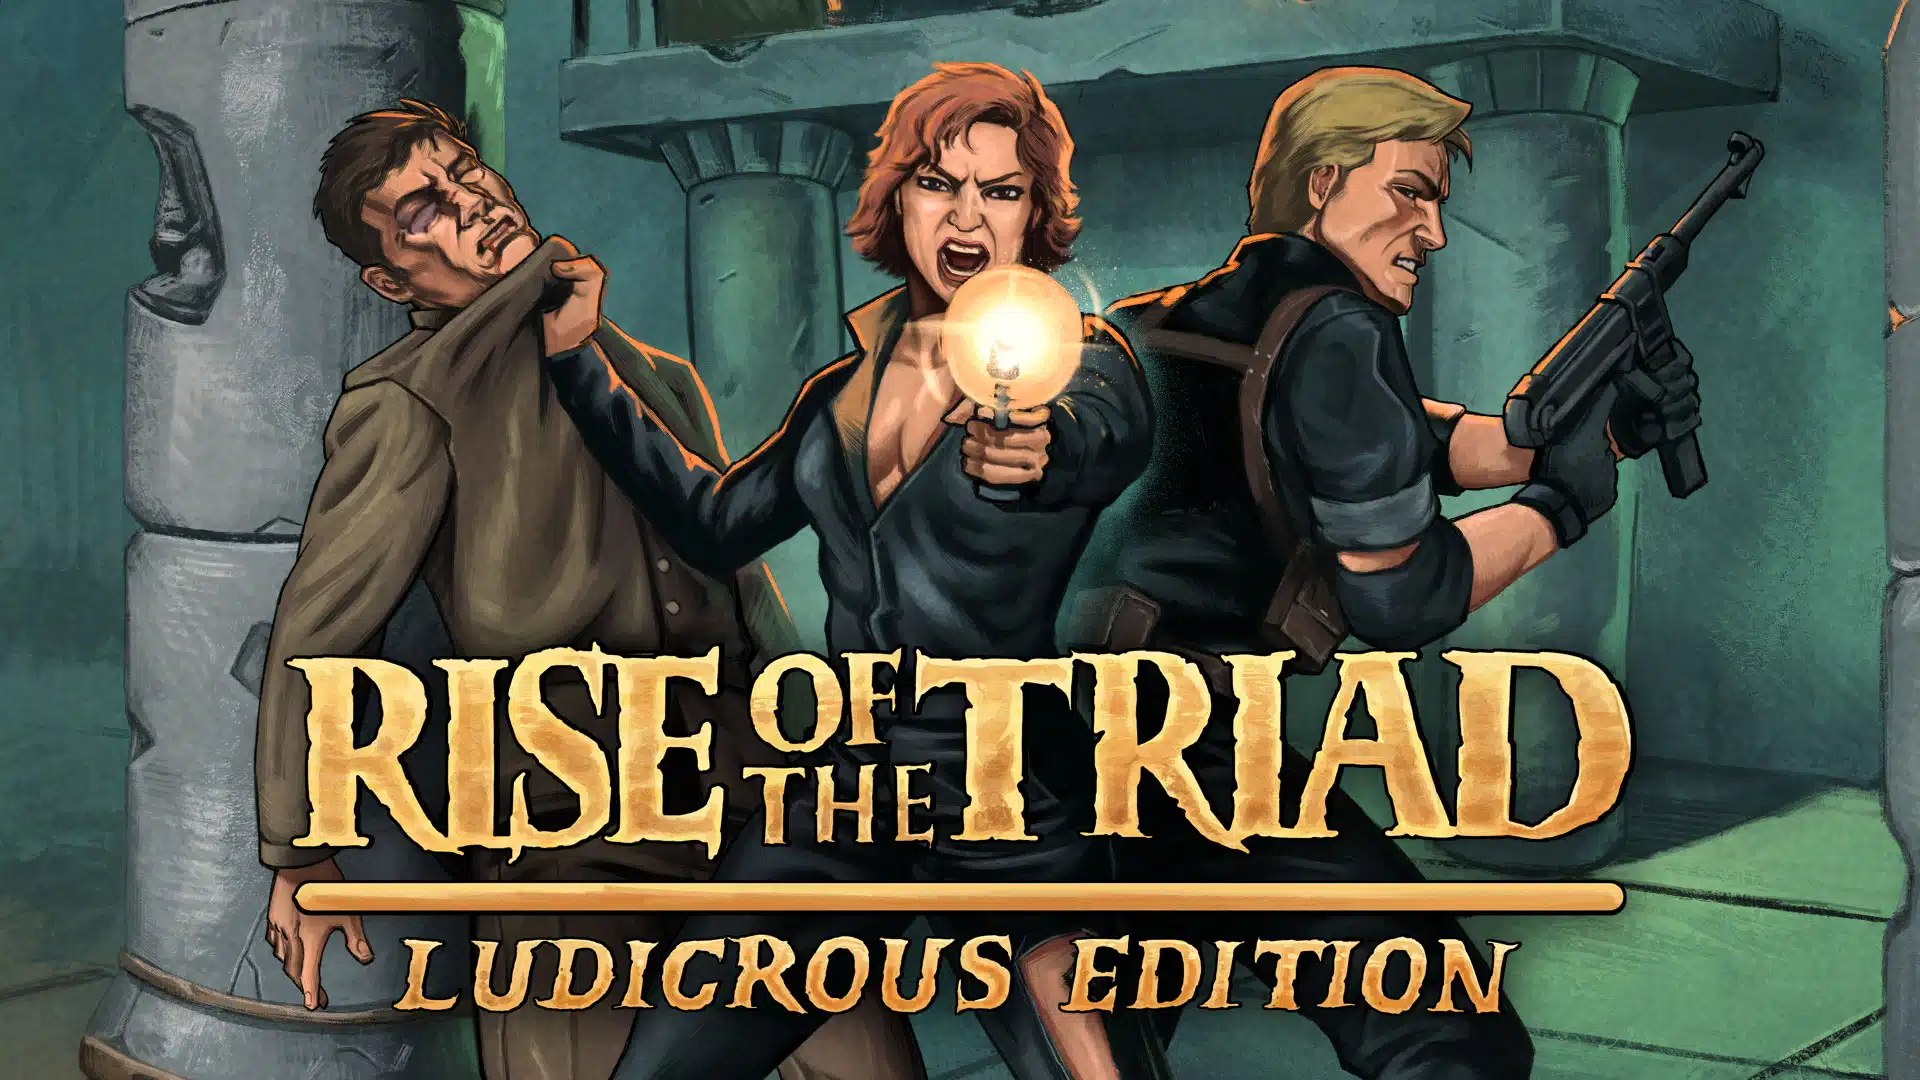 Rise of the Triad: Ludicrous Edition console